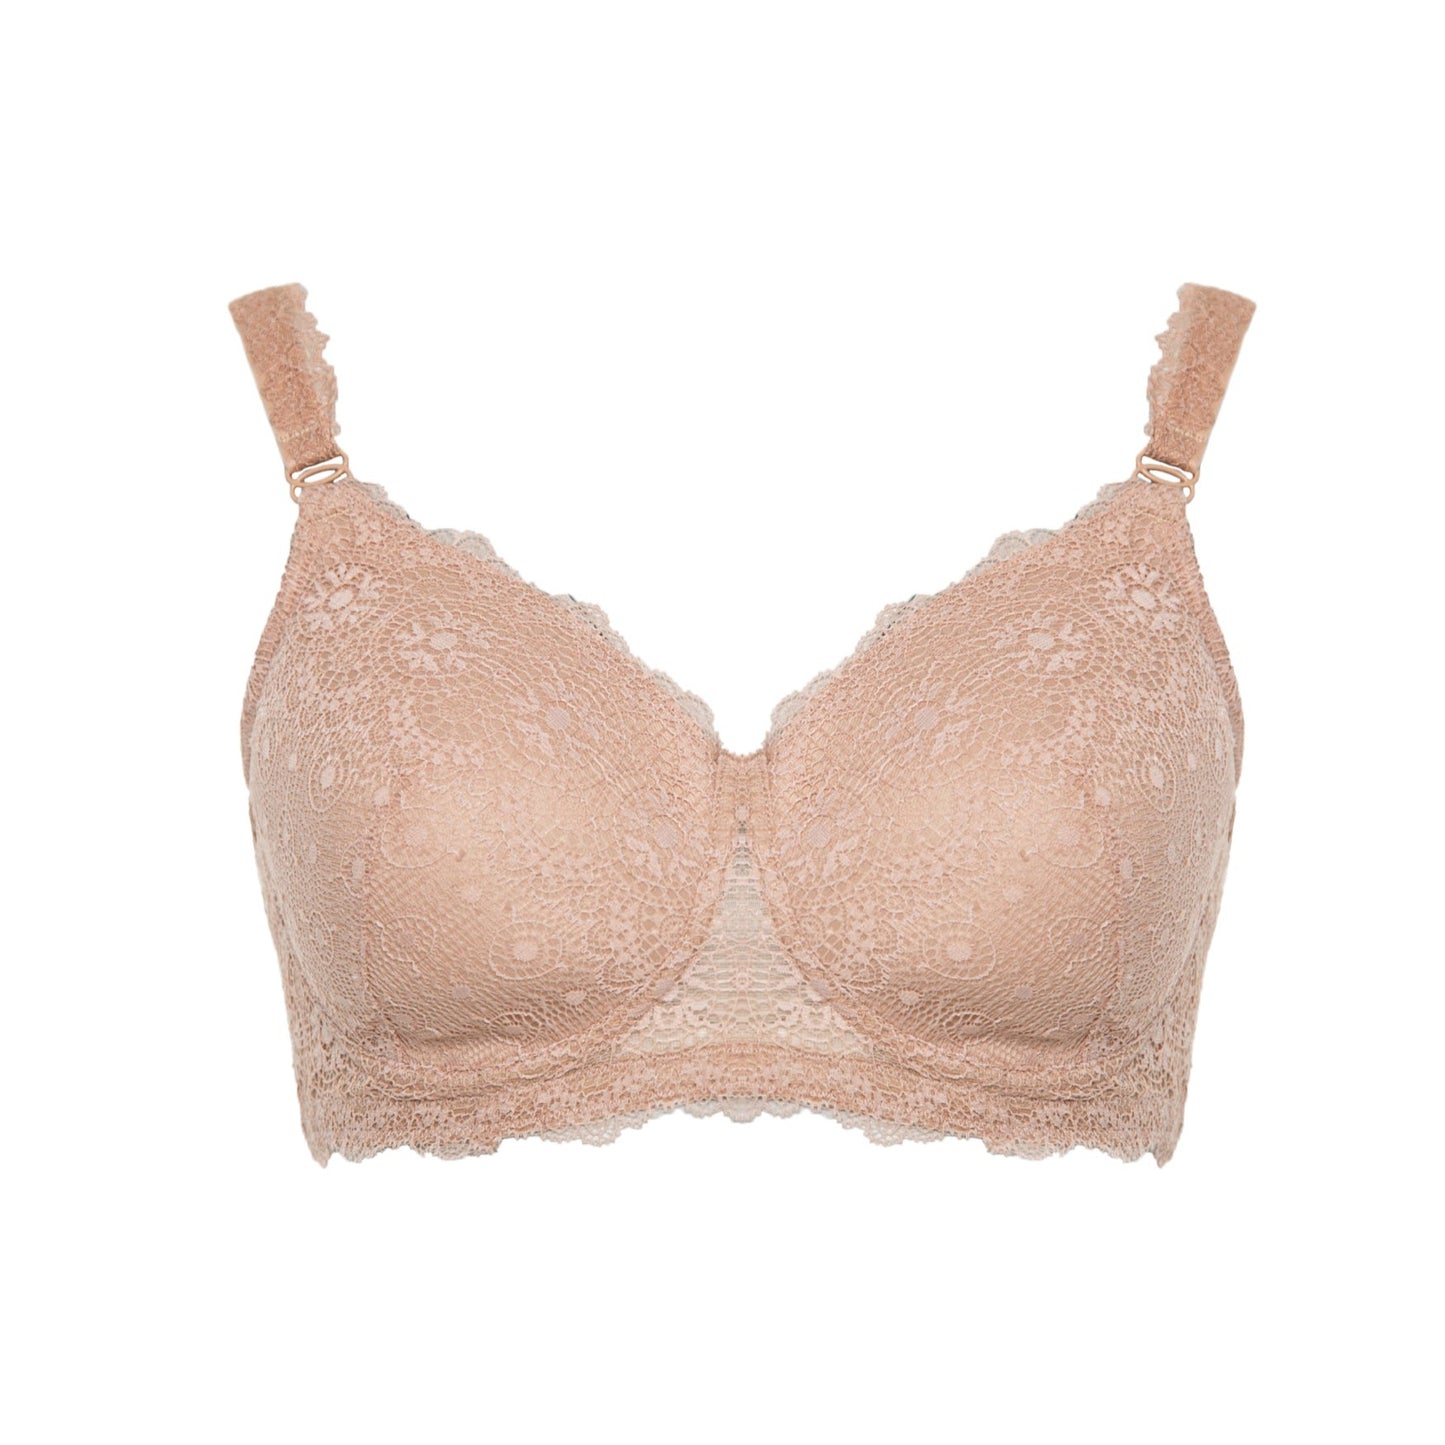 The Salsa Bra | Fashionable design and flattering silhouettes with all the features needed for post-mastectomy. MEGAMI lingerie at Bra Sisters